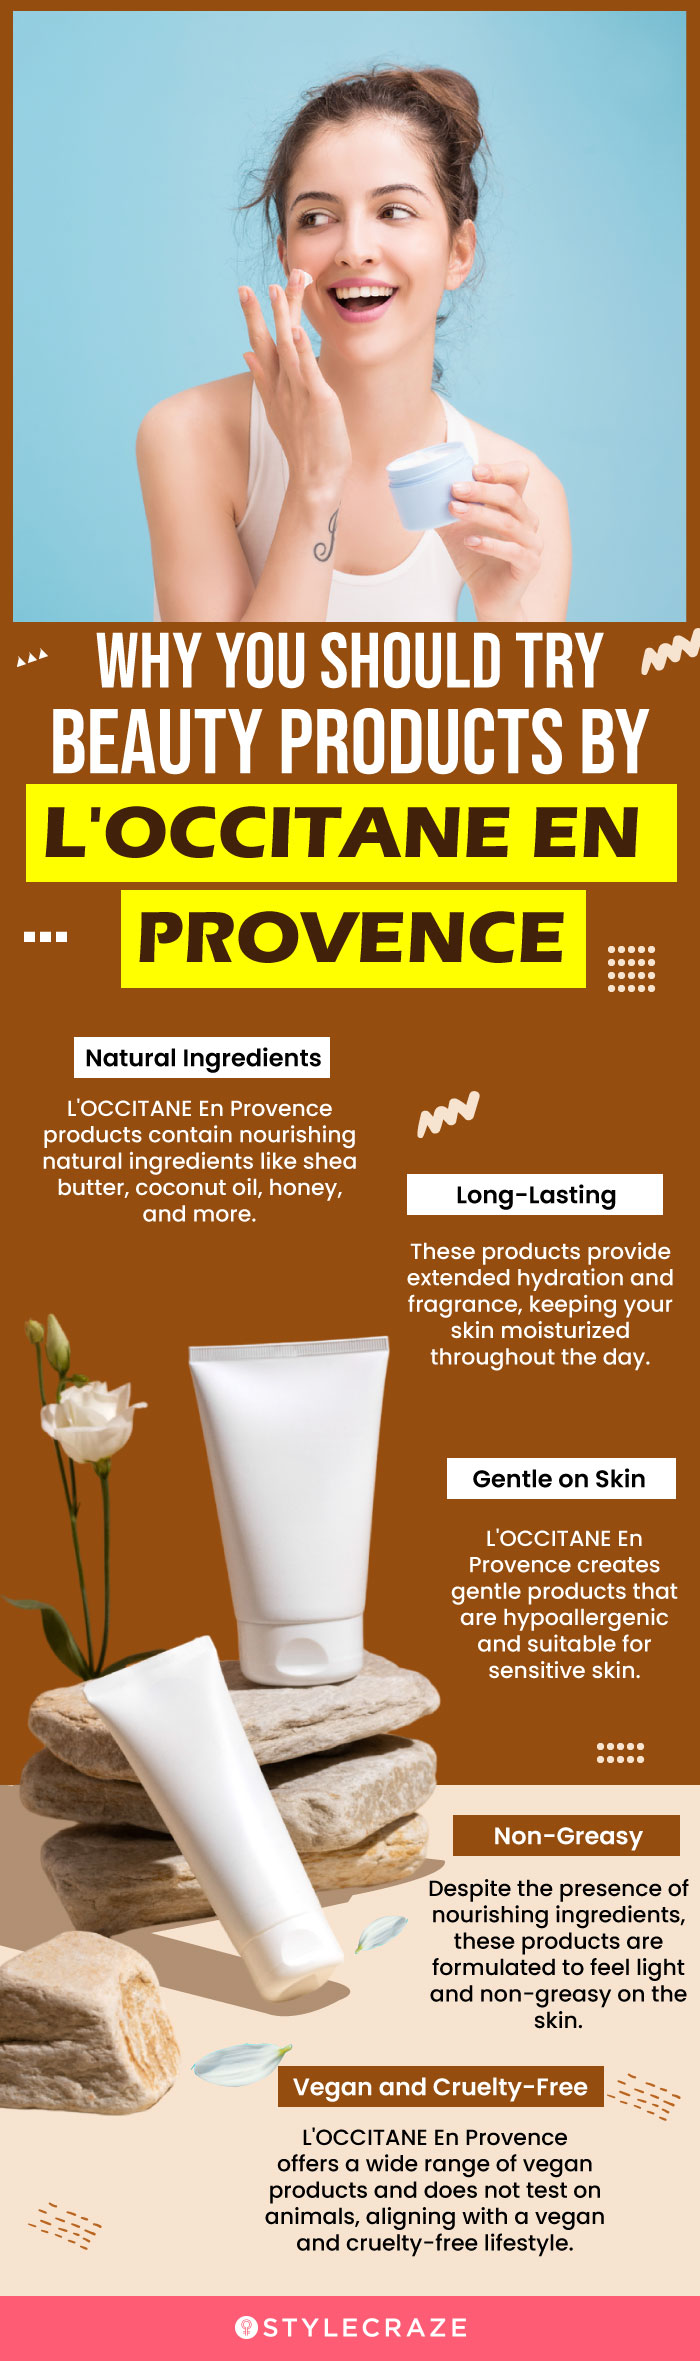 Why You Should Try Beauty Products by L'OCCITANE En Provence (infographic)